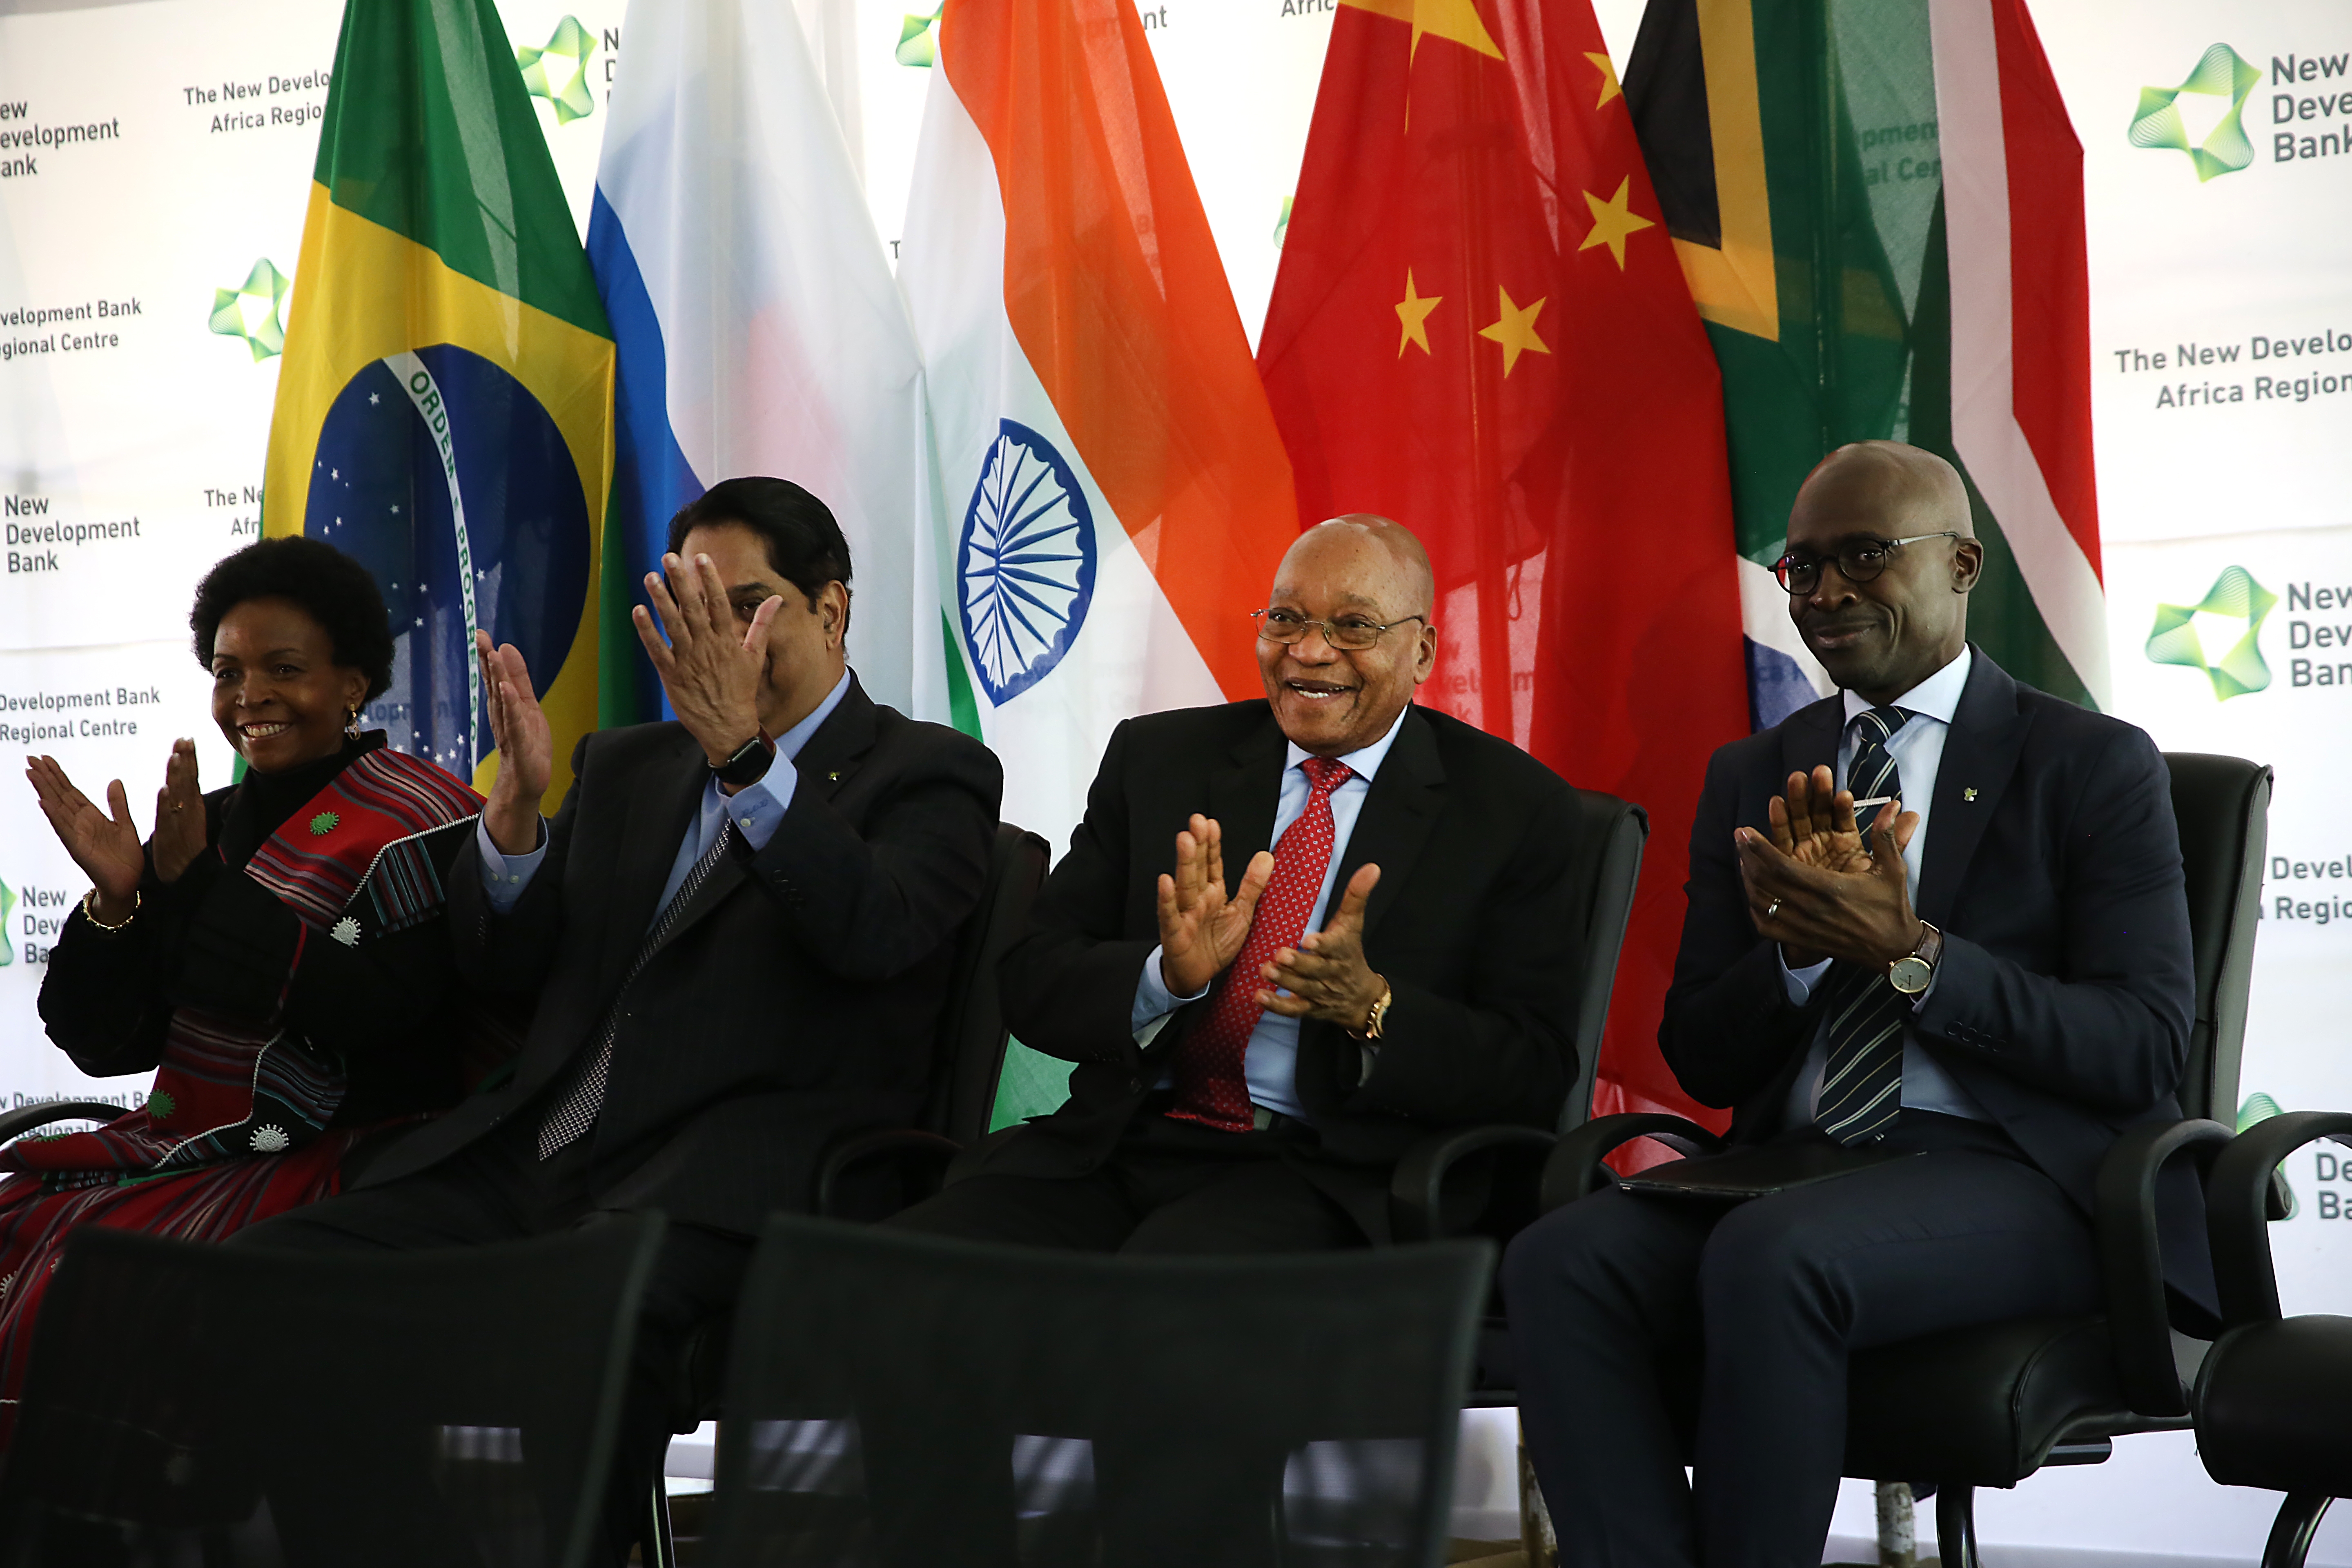 Brics Summit 2017 How The 5 Countries Have Fared Time